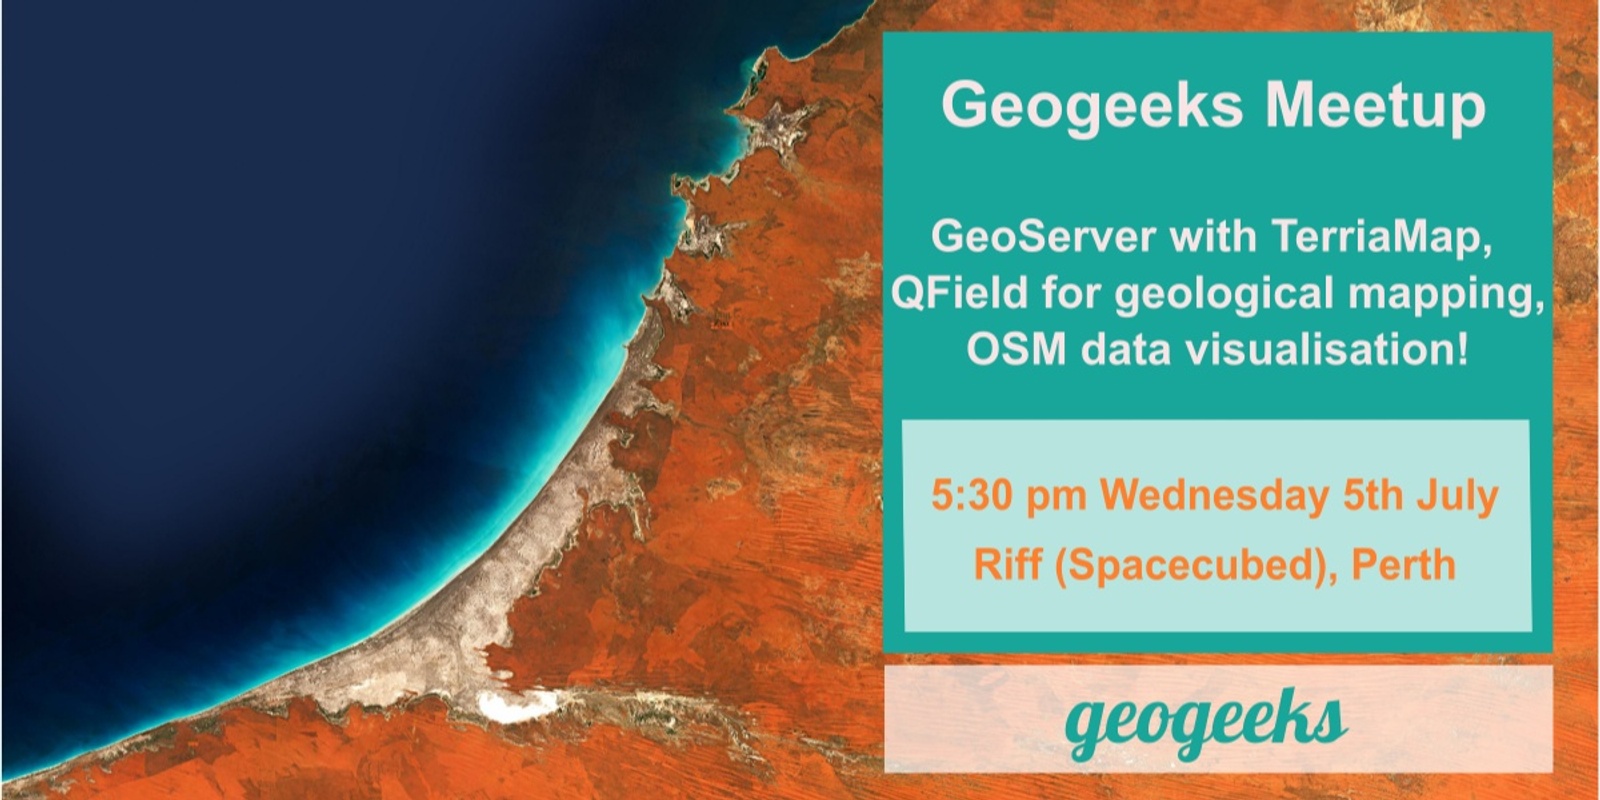 Banner image for Geogeeks Meetup: GeoServer, QField, and OSM data visualisation